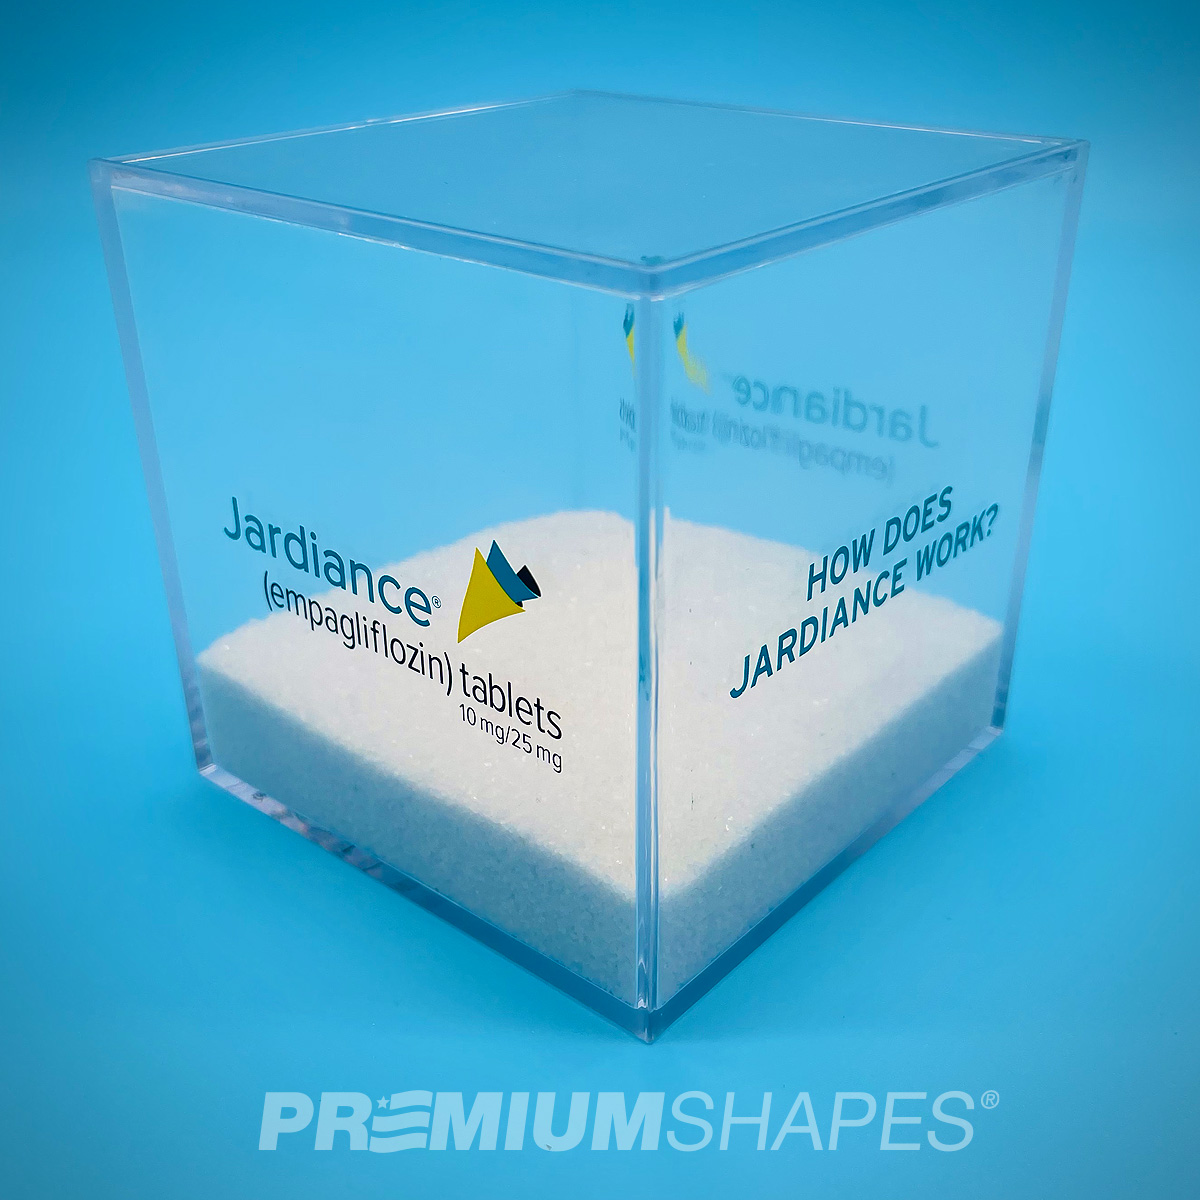 Pharmaceutical educational aids manufactured by premium shapes